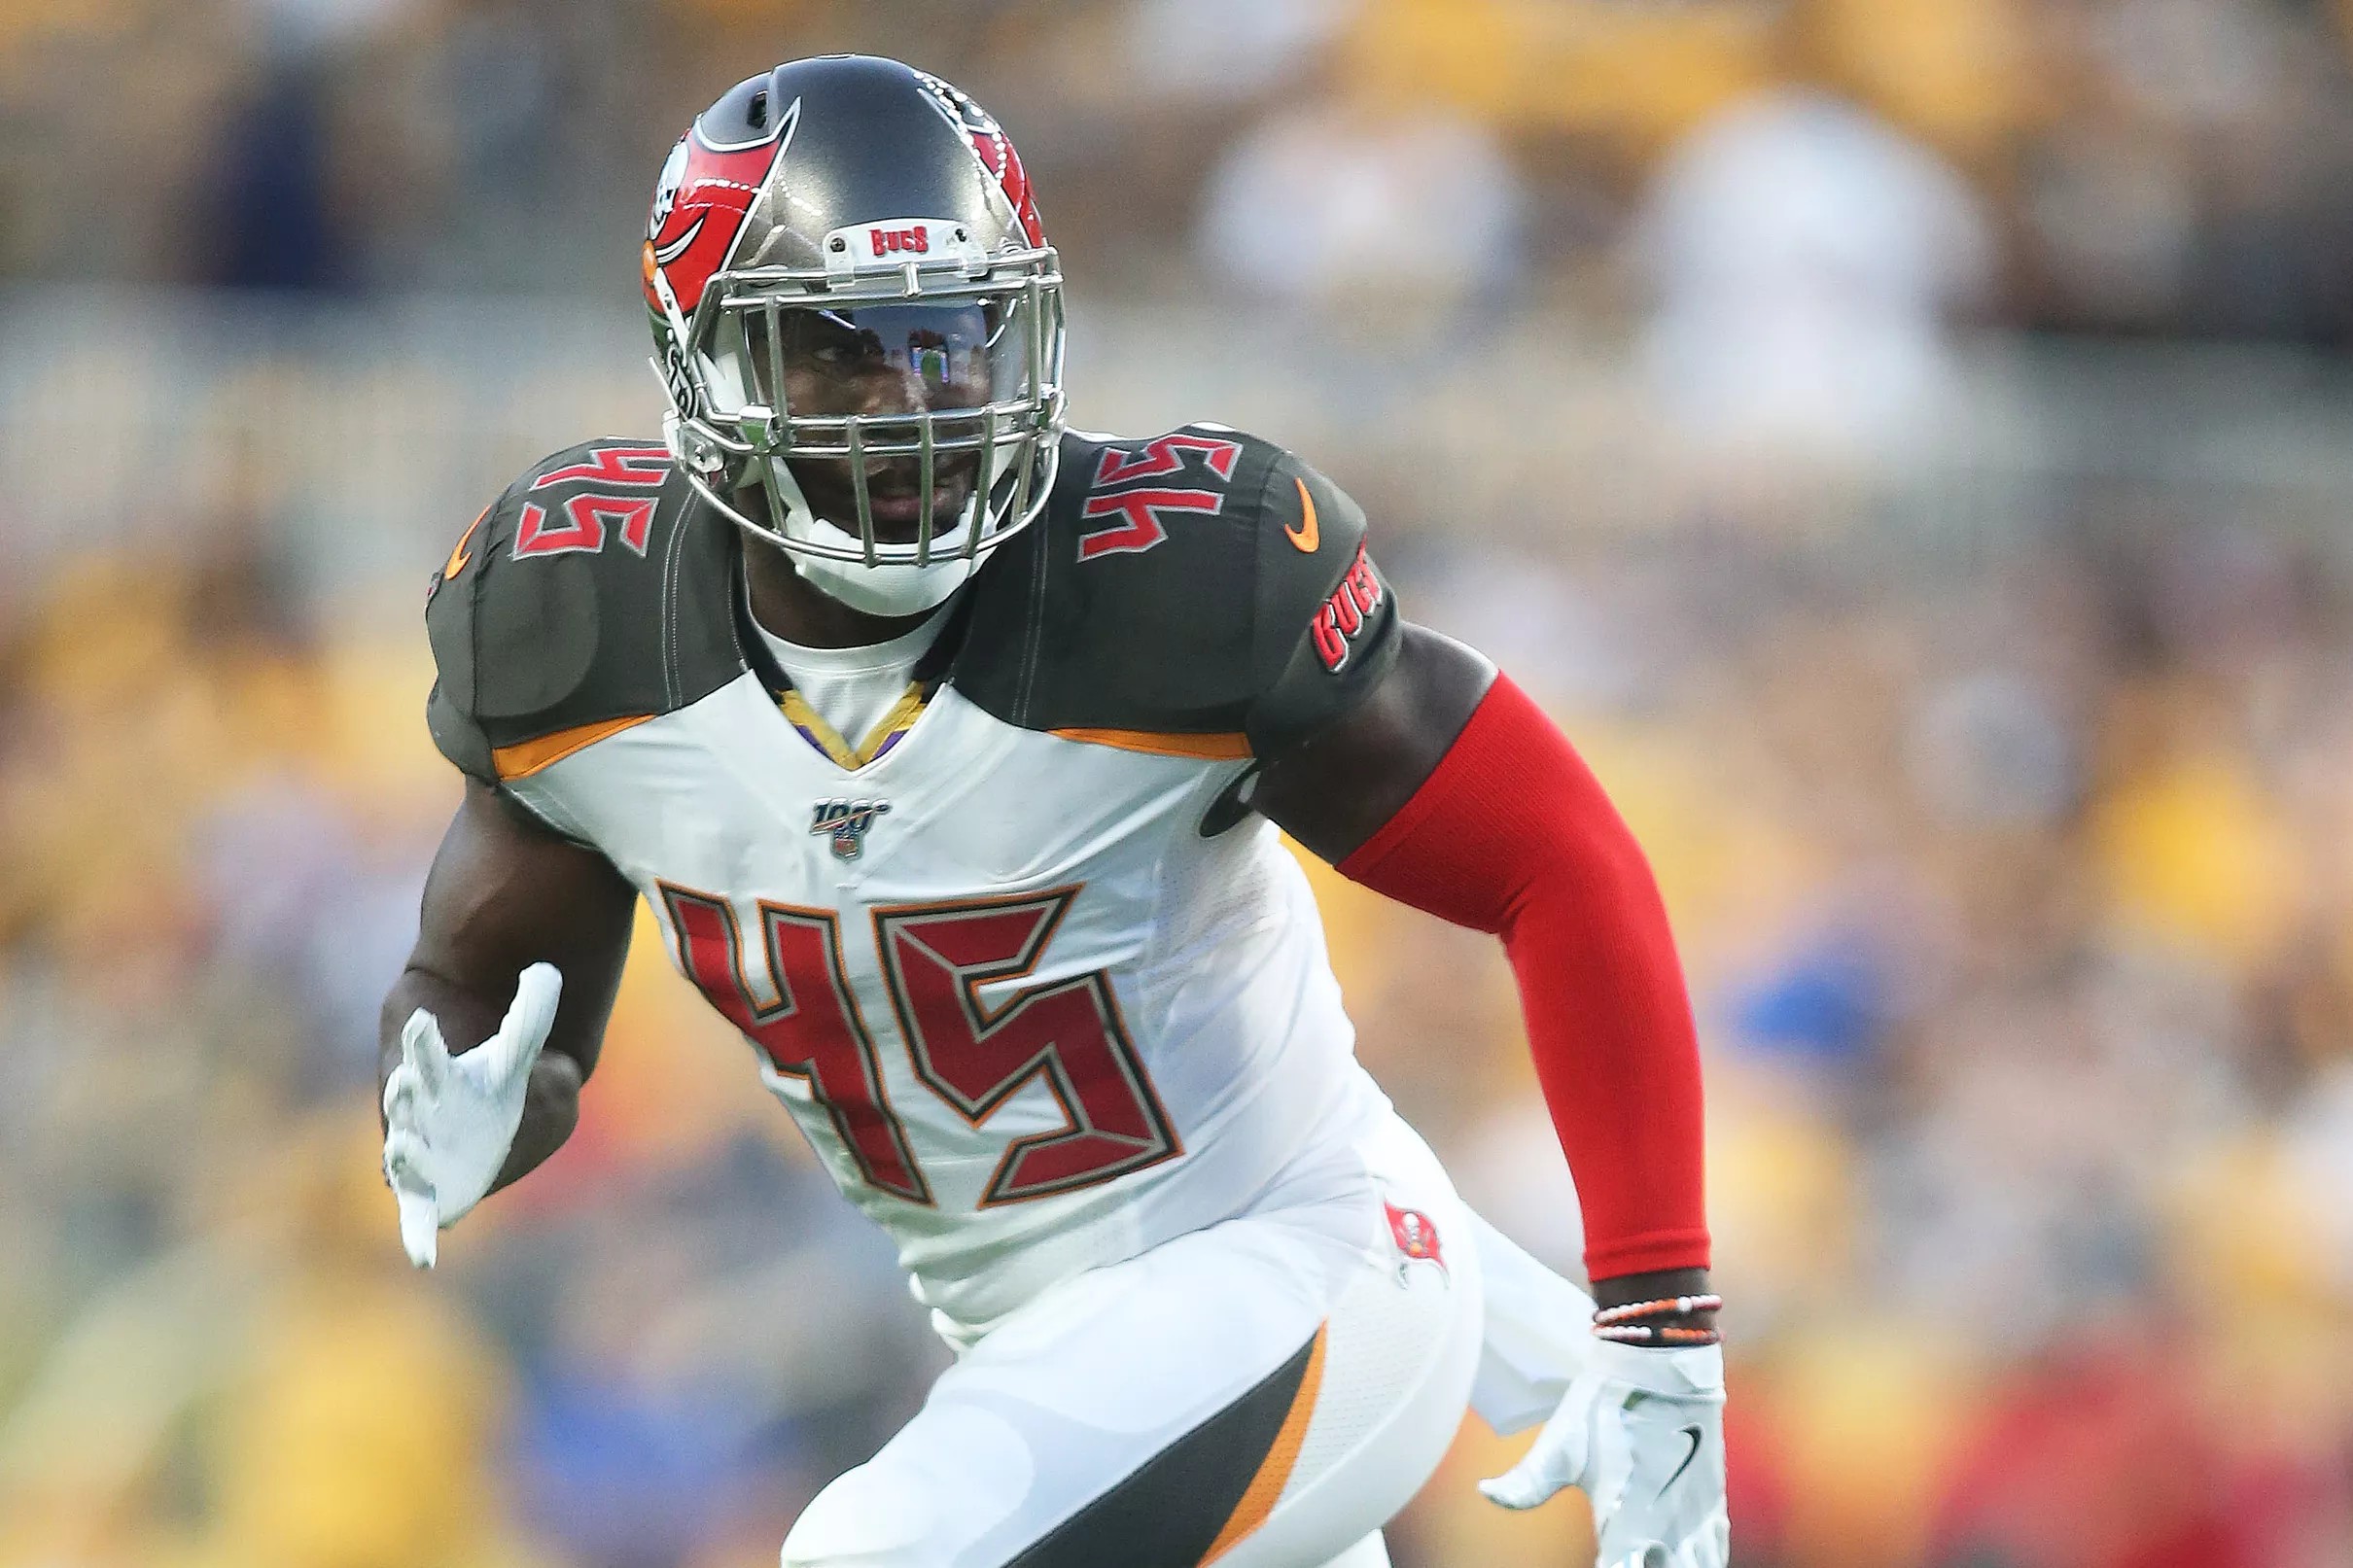 Additions to the Buccaneers linebacker unit will have a positive impact